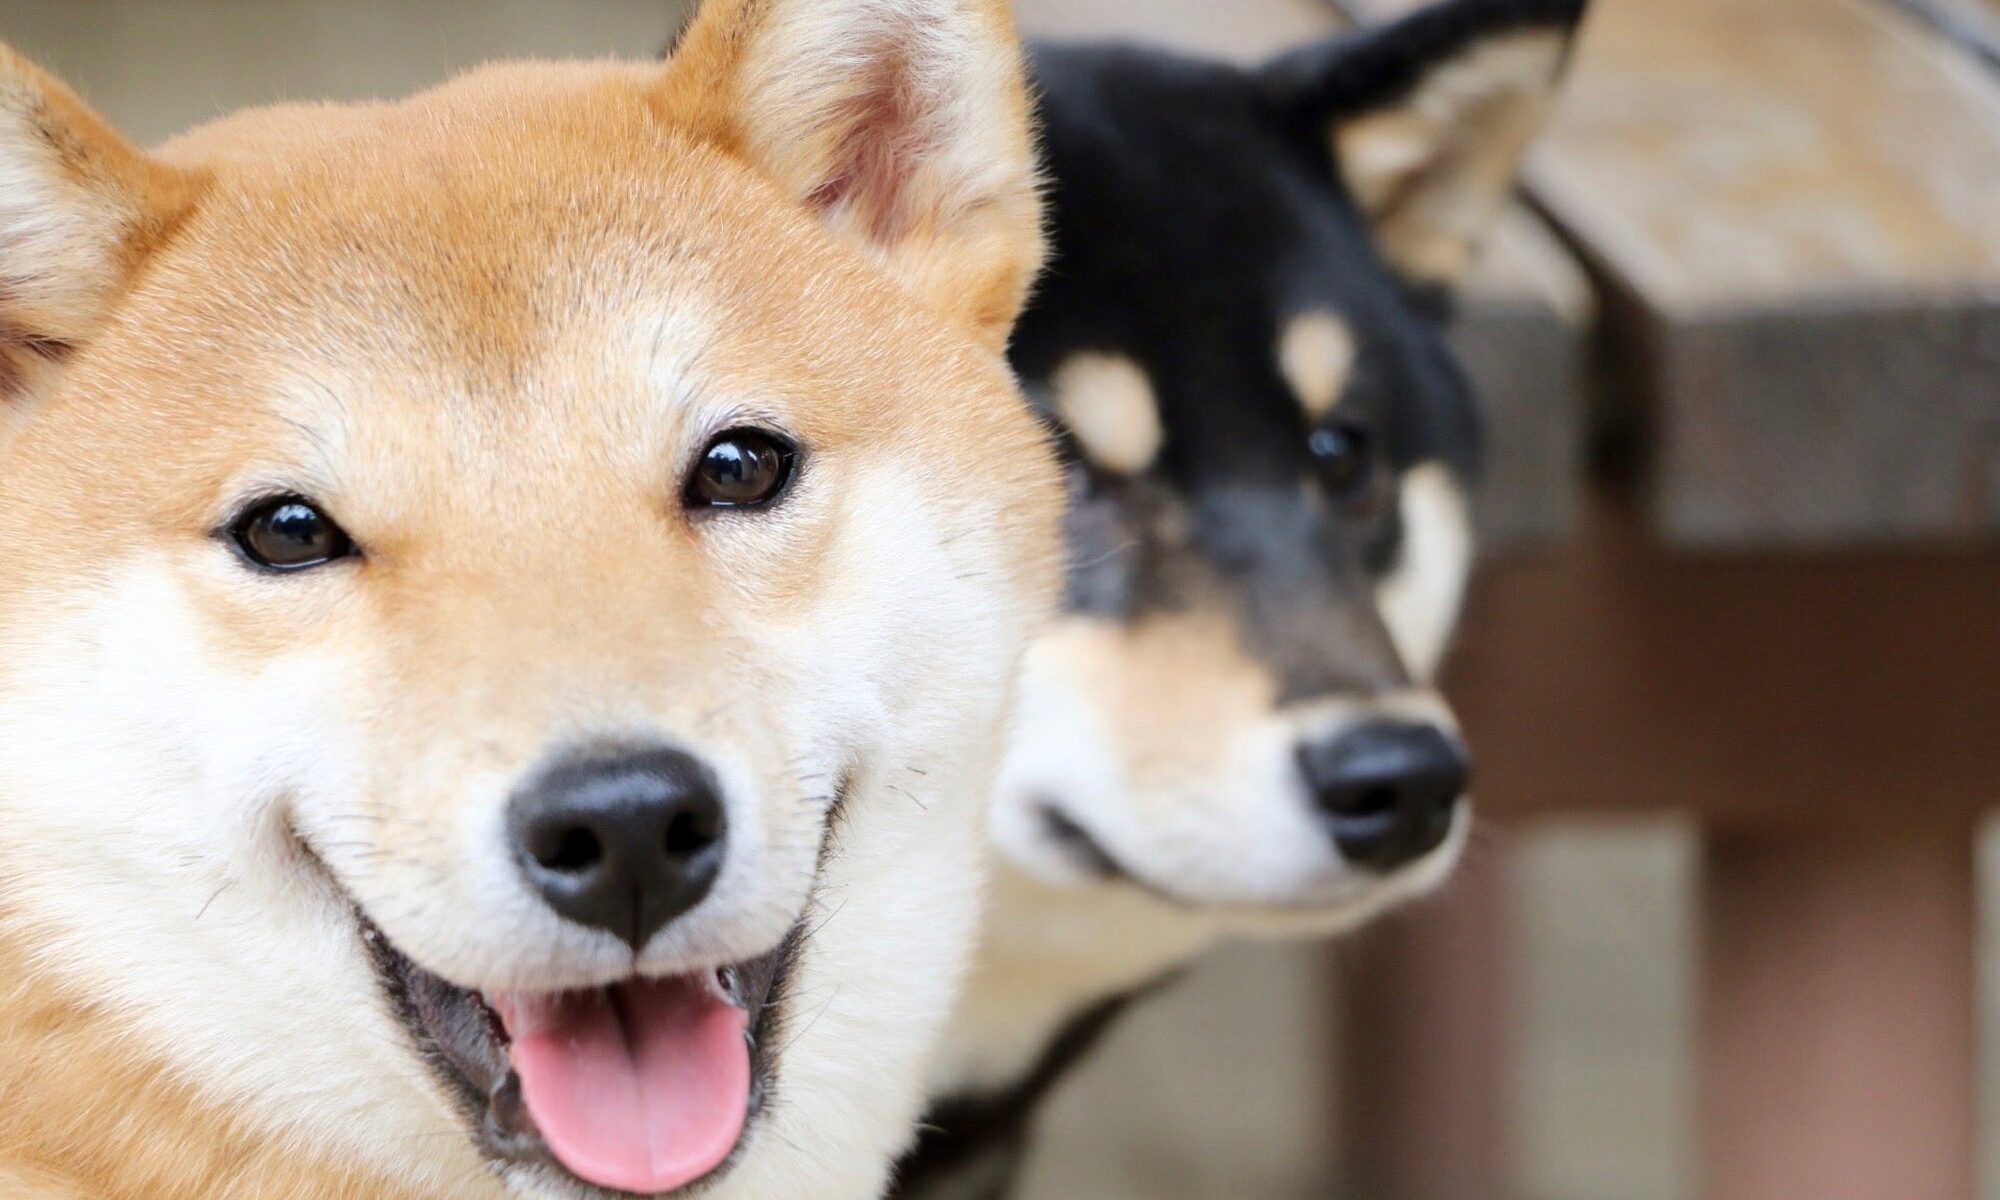 If You Invested $100 in Shiba Inu 1 Year Ago, Here's How Much You'd Have Now